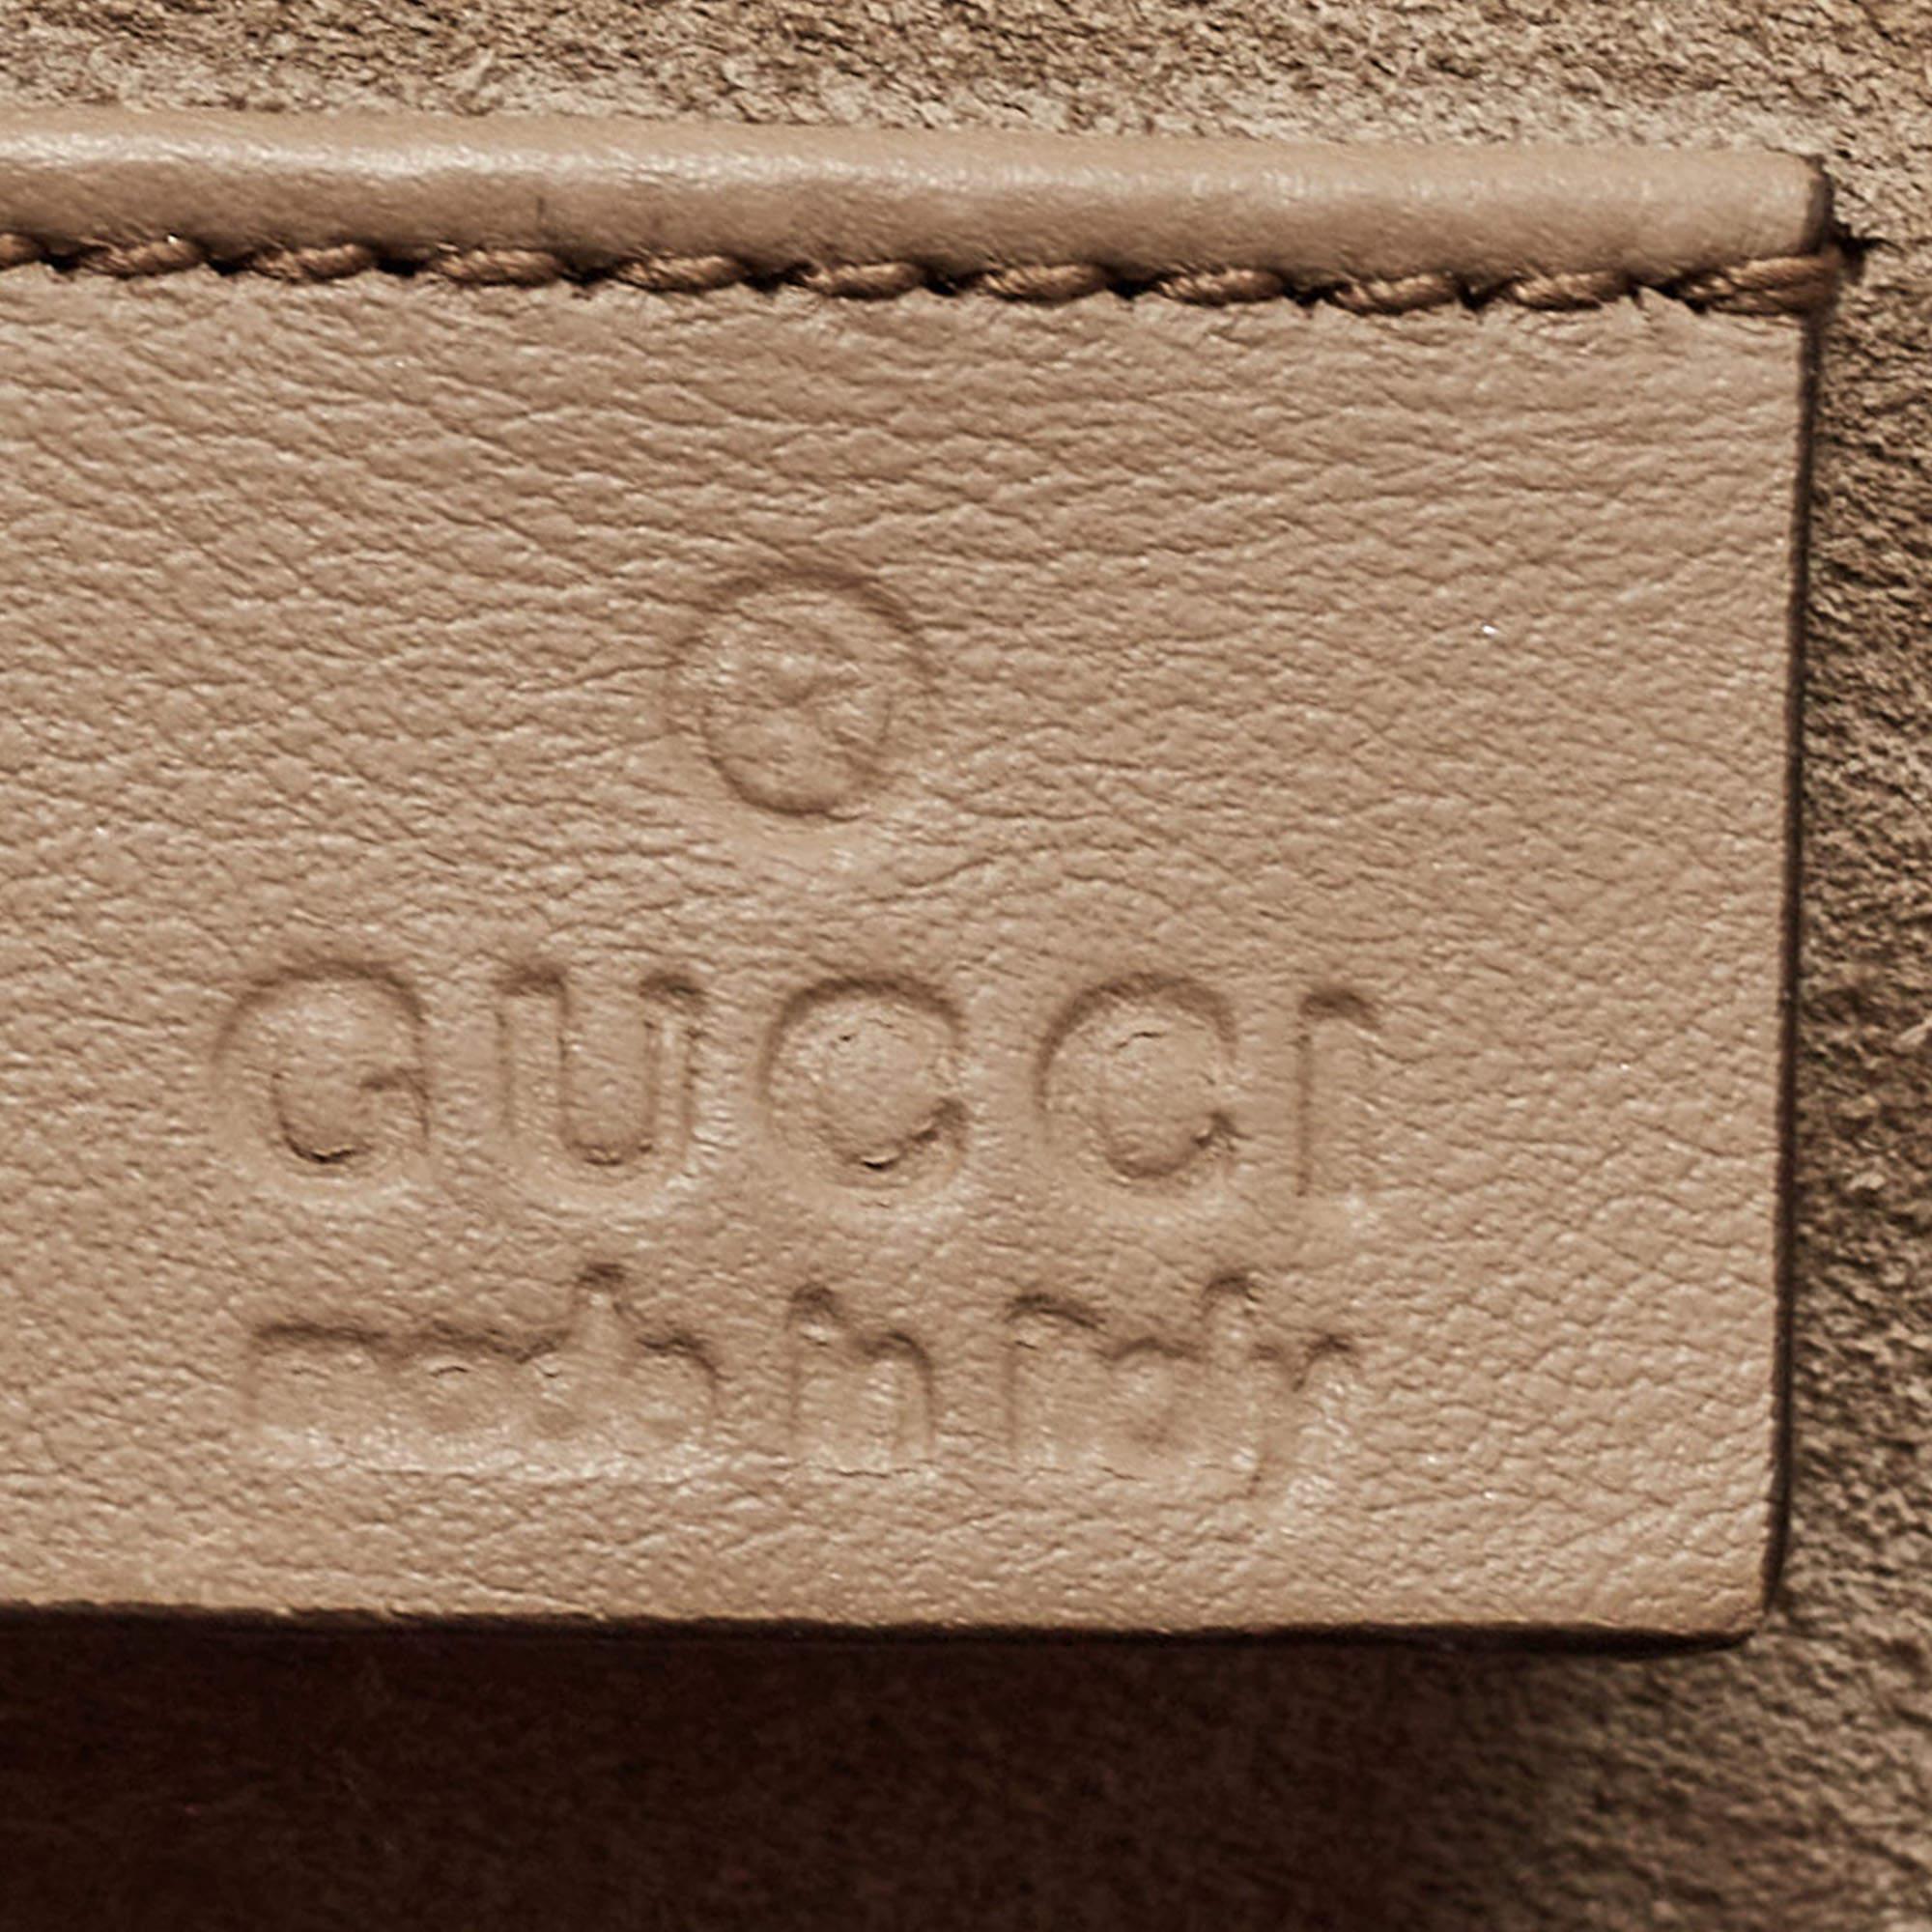 Gucci Beige GG Supreme Canvas and Suede Small Dionysus Shoulder Bag For Sale 7